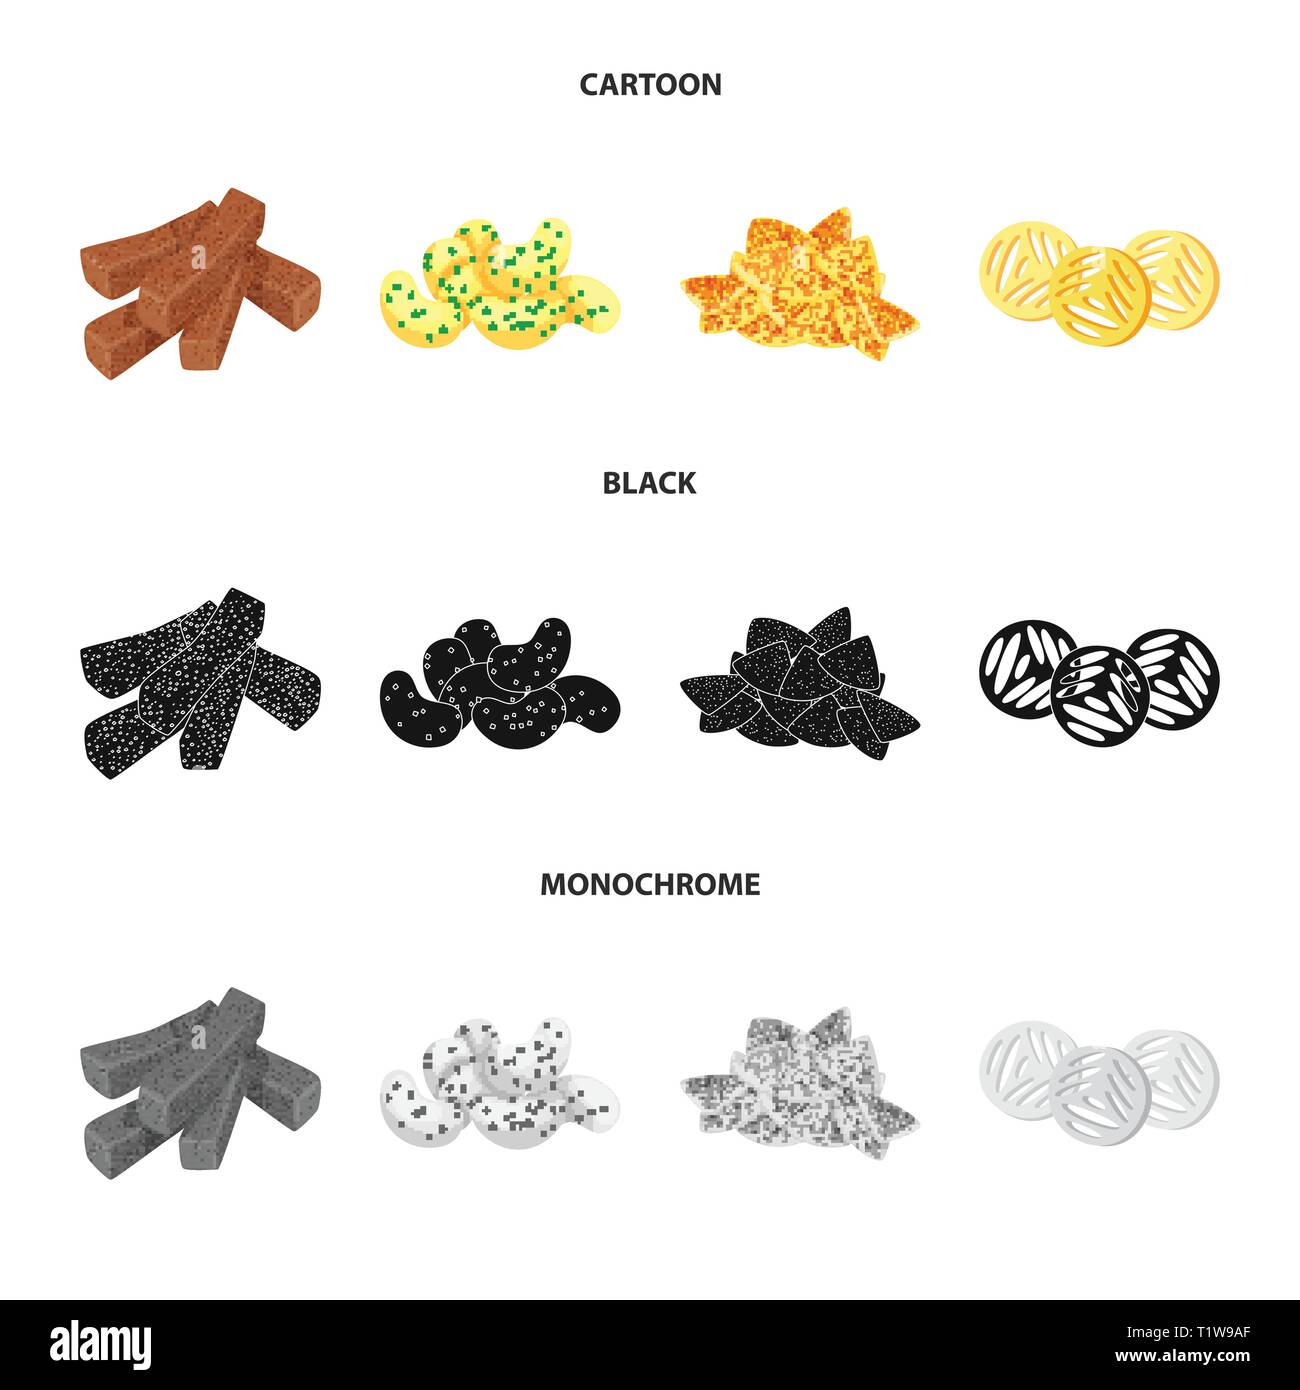 croutons,corn,chip,bread,sticks,potato,snack,bowl,crackers,sweet,yellow,soup,organic,crispy,slice,crouton,crisp,cube,agricultural,salty,toast,appetizer,brown,texture,Oktoberfest,bar,party,cooking,food,crunchy,baked,flavor,product,menu,set,vector,icon,illustration,isolated,collection,design,element,graphic,sign Vector Vectors , Stock Vector